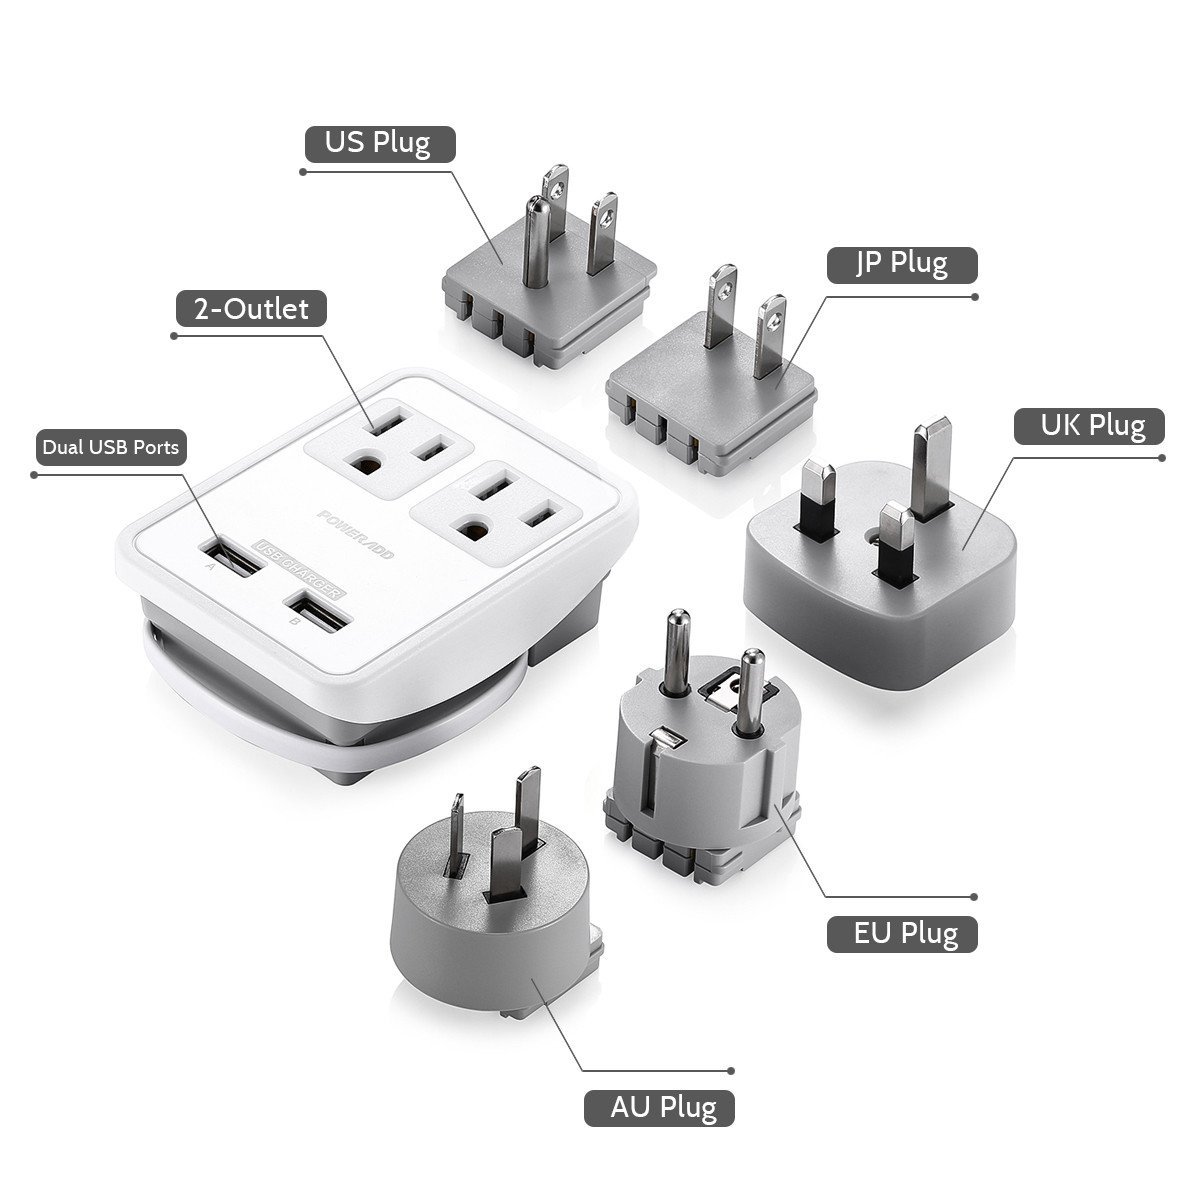 The Best Universal Travel Adapter